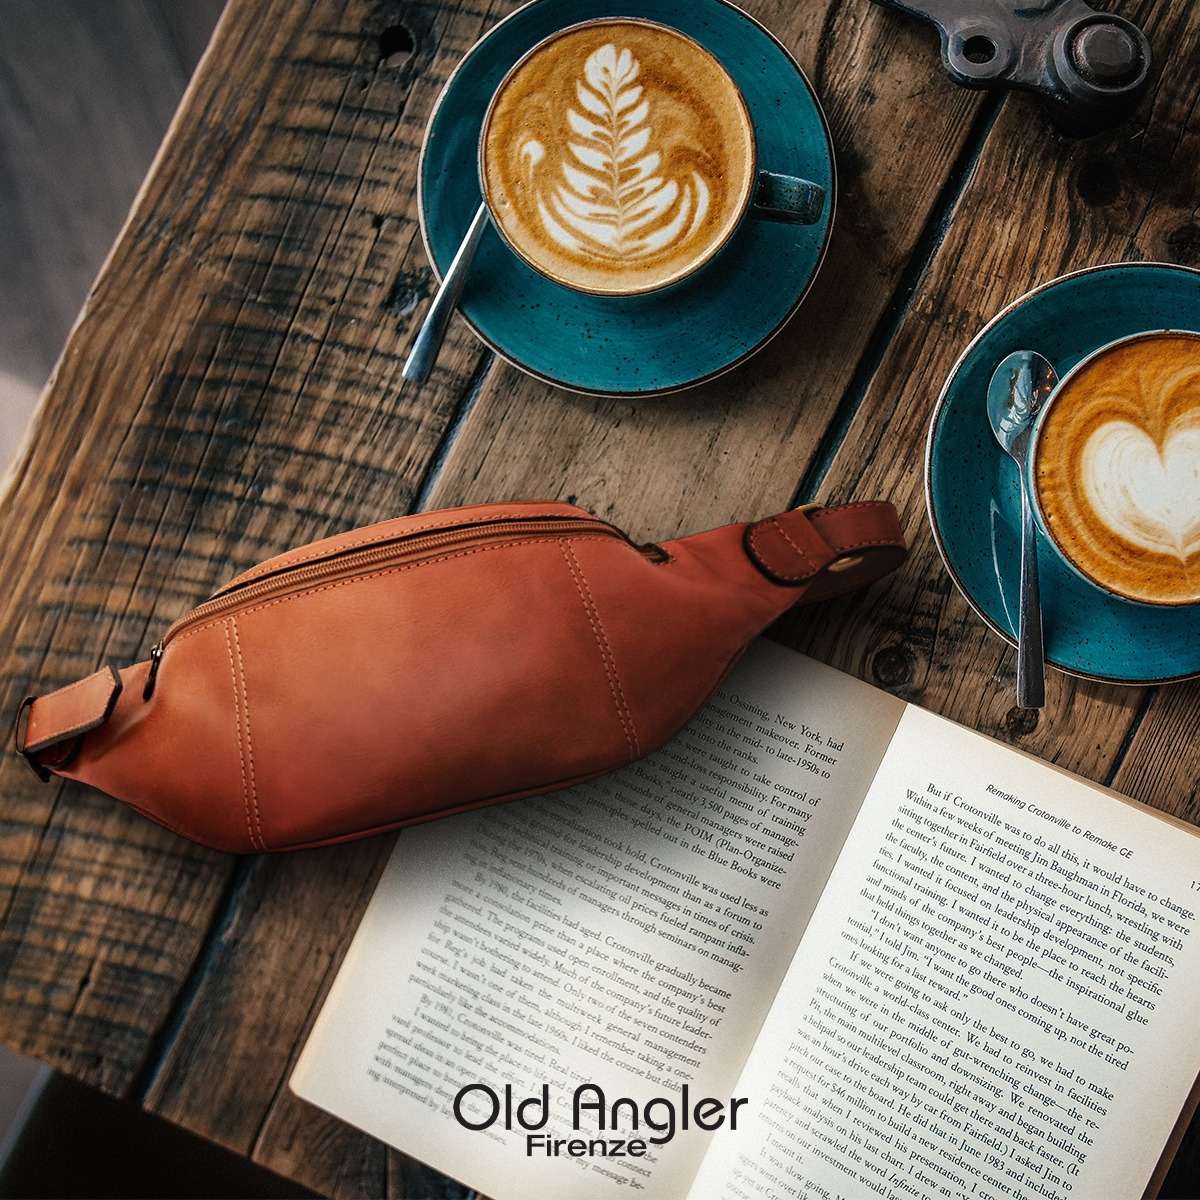 Old Angler Firenze - Artisan Leather Bags